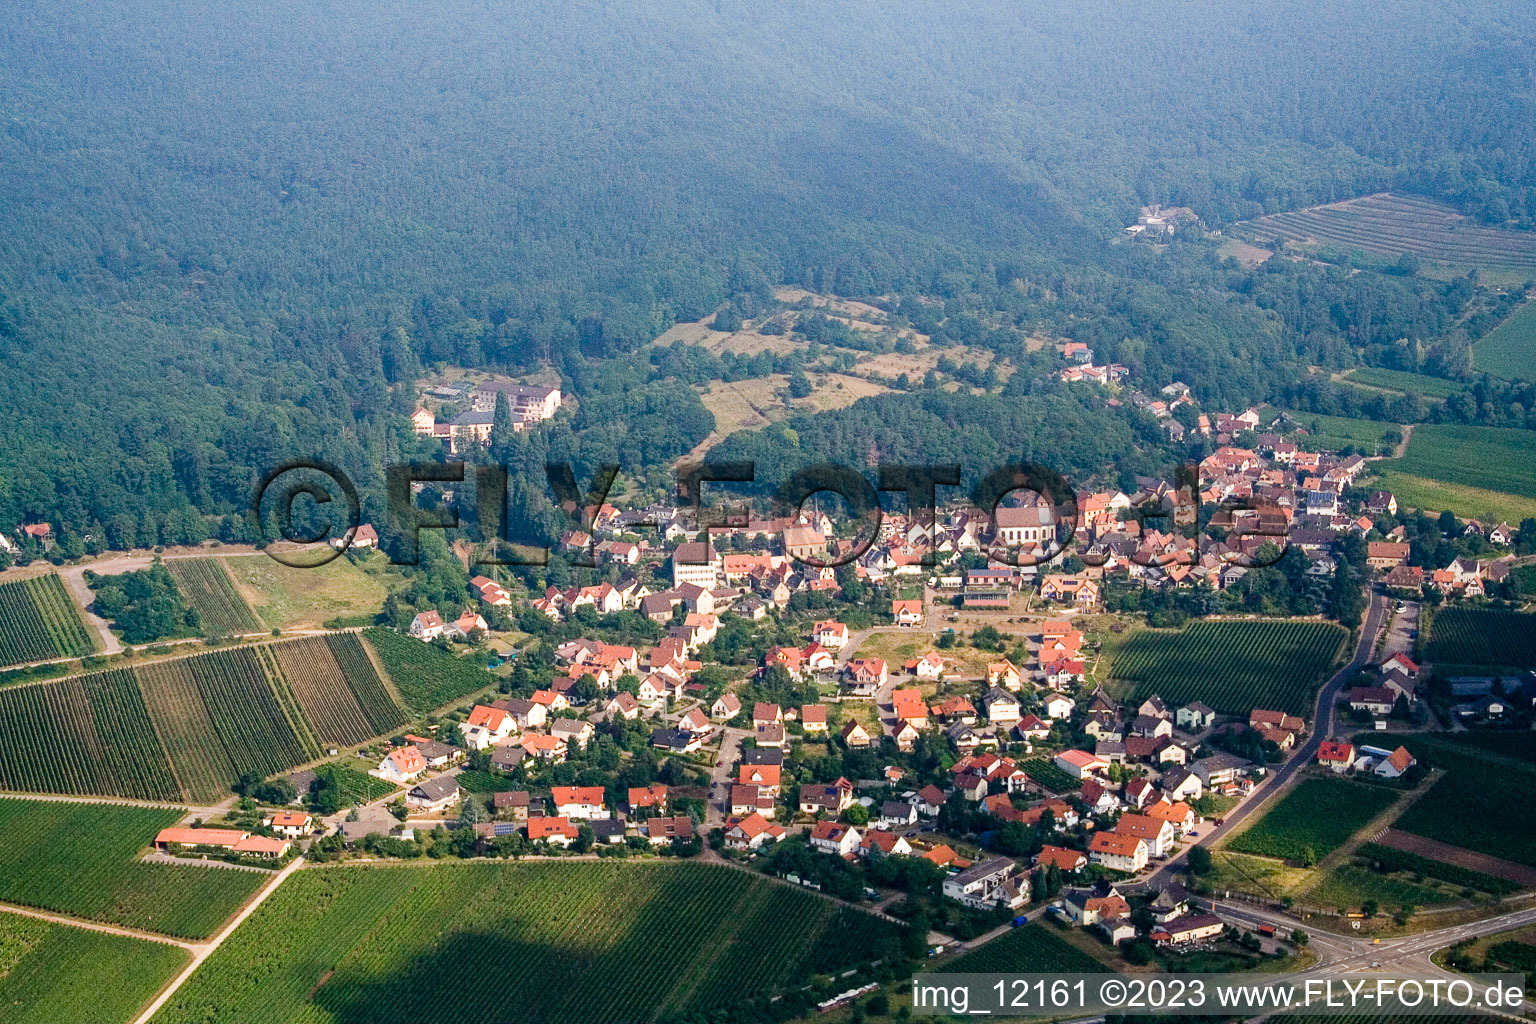 Drone image of Gleisweiler in the state Rhineland-Palatinate, Germany